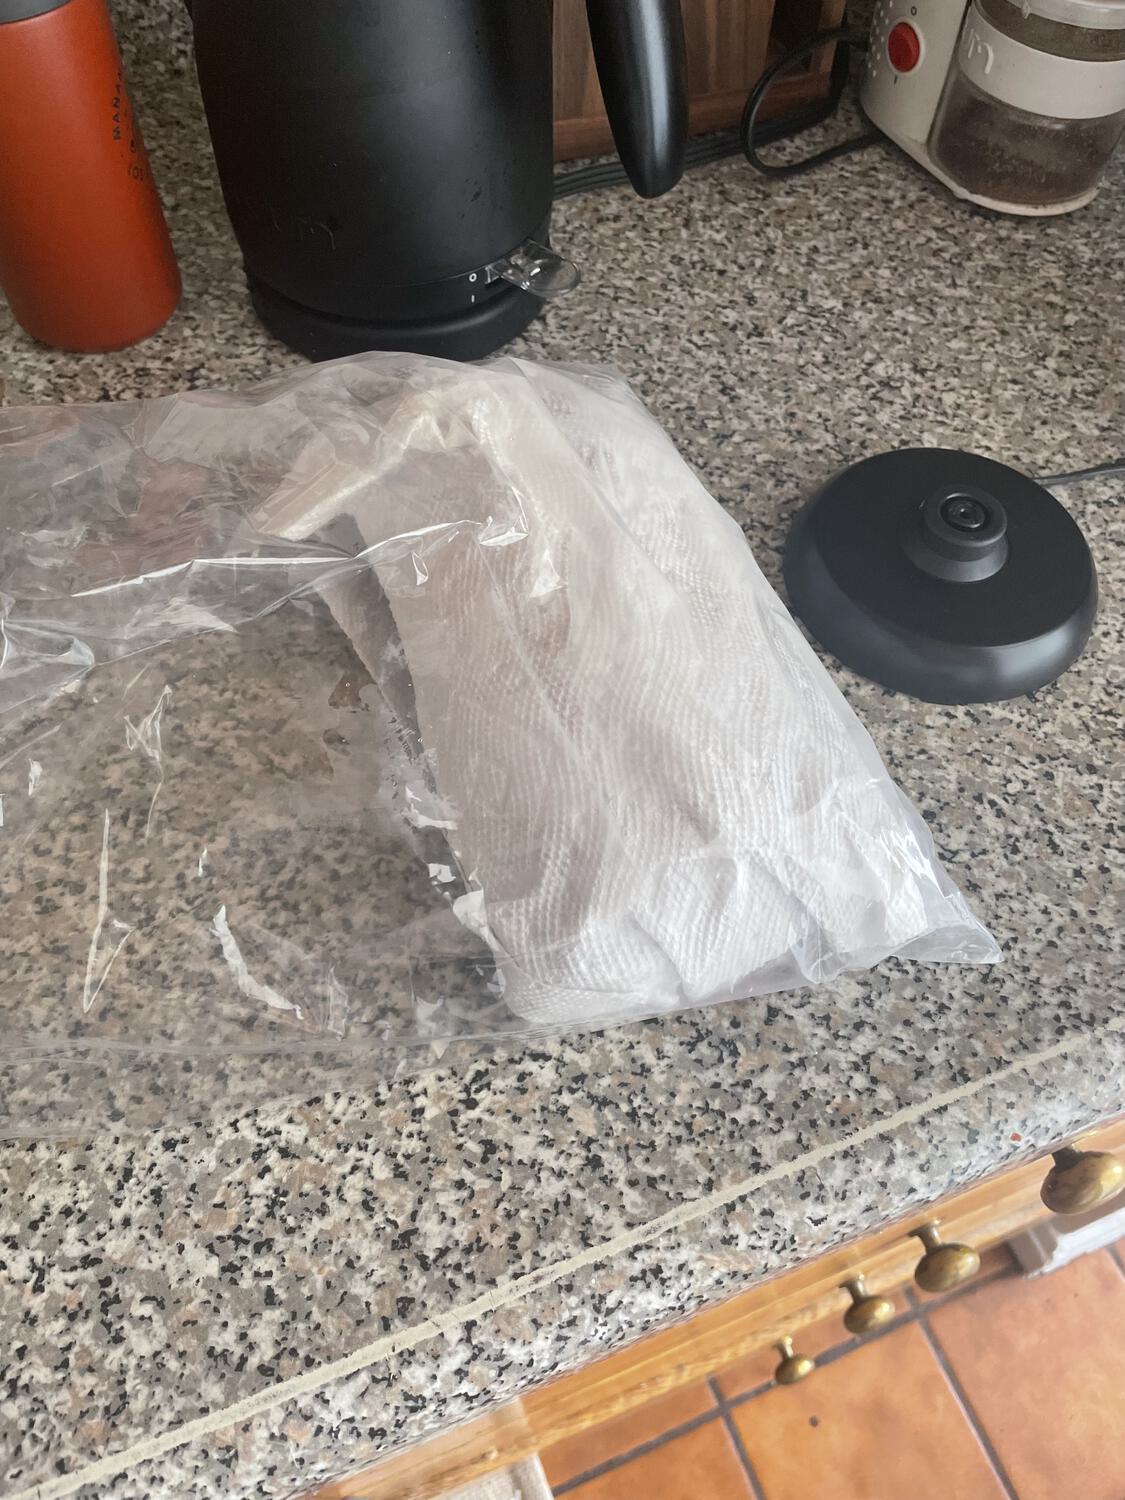 A loaf of banana bread wrapped in paper towel and plastic wrap, sitting on a cluttered kitchen counter